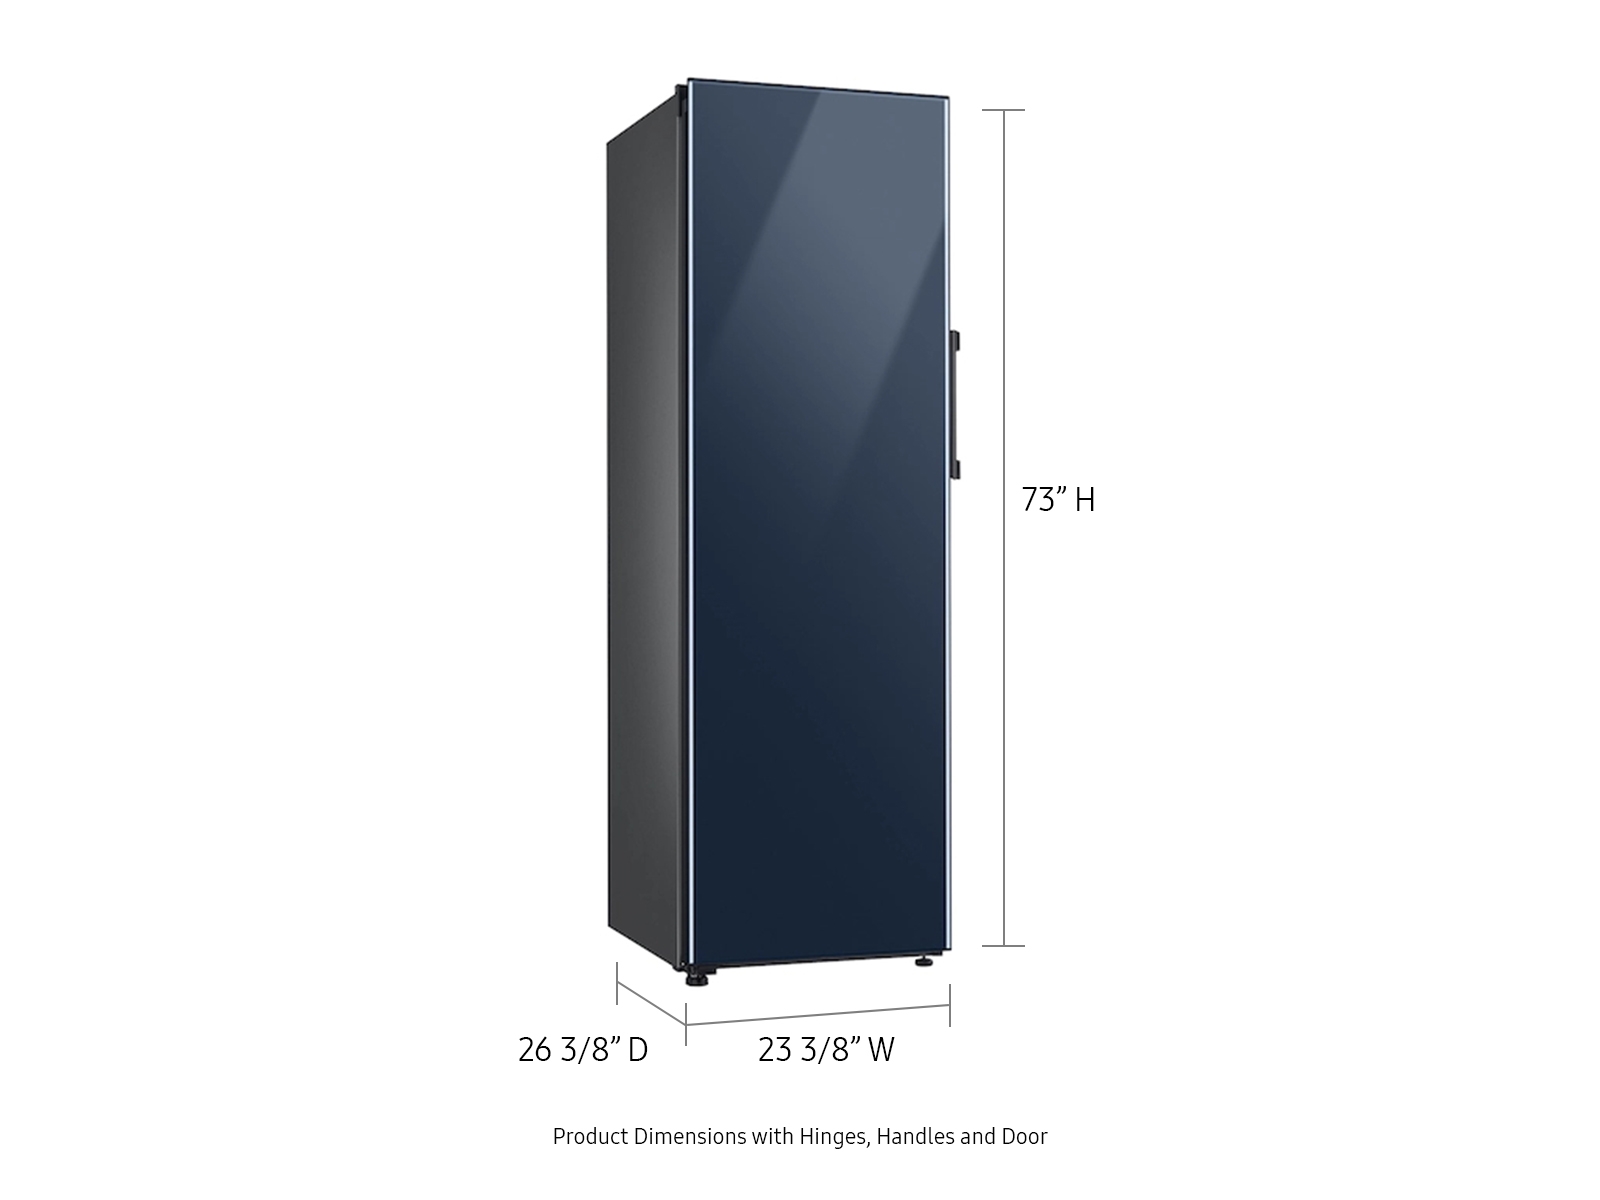 Thumbnail image of 11.4 cu. Ft. Bespoke Flex Column Refrigerator with Flexible Design in Navy Glass